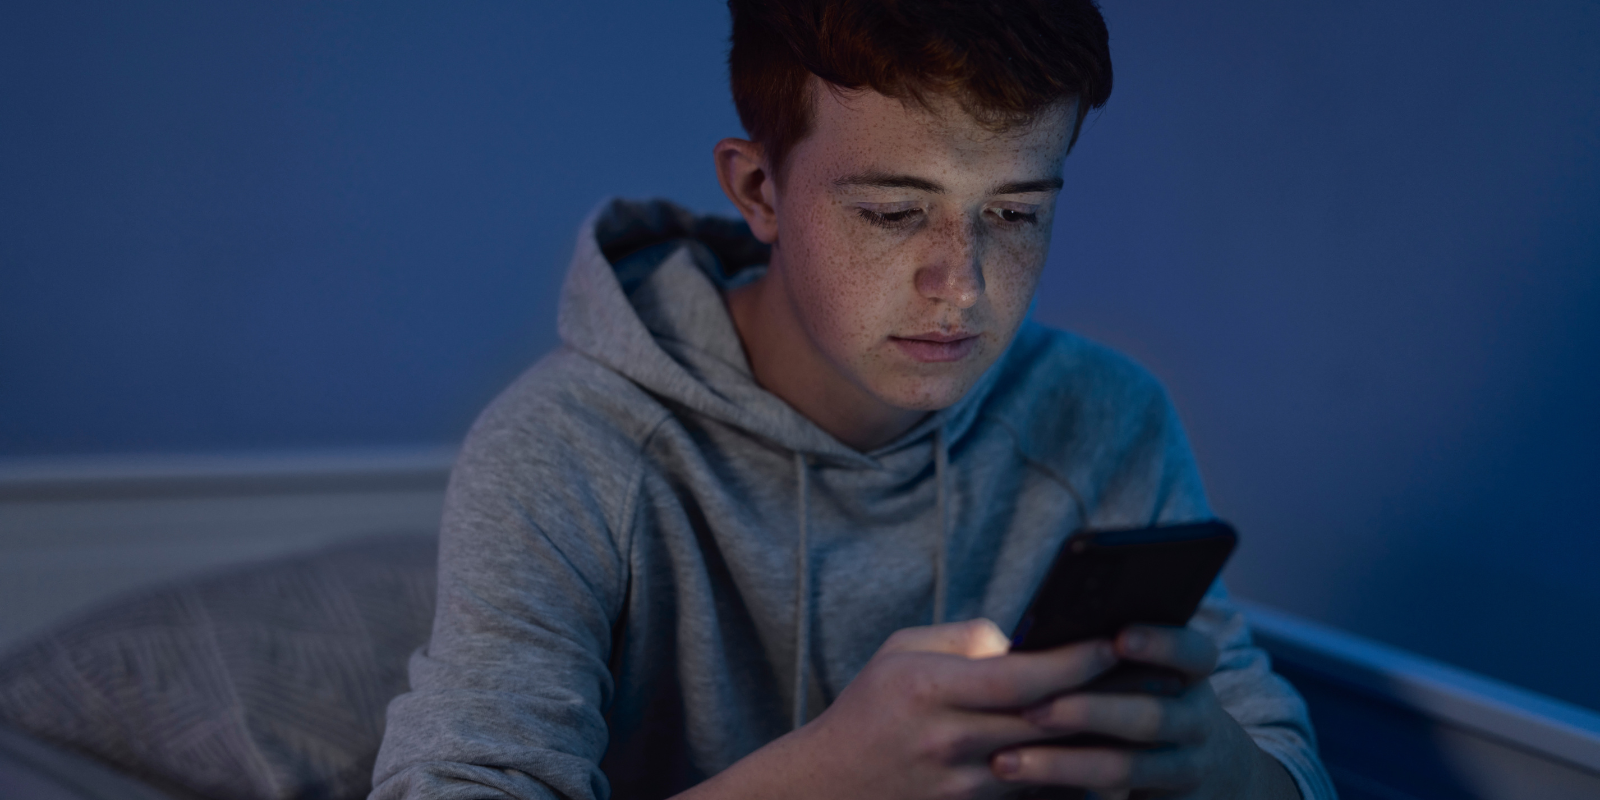 Teenage boy on his cell phone | The Boys Education Series